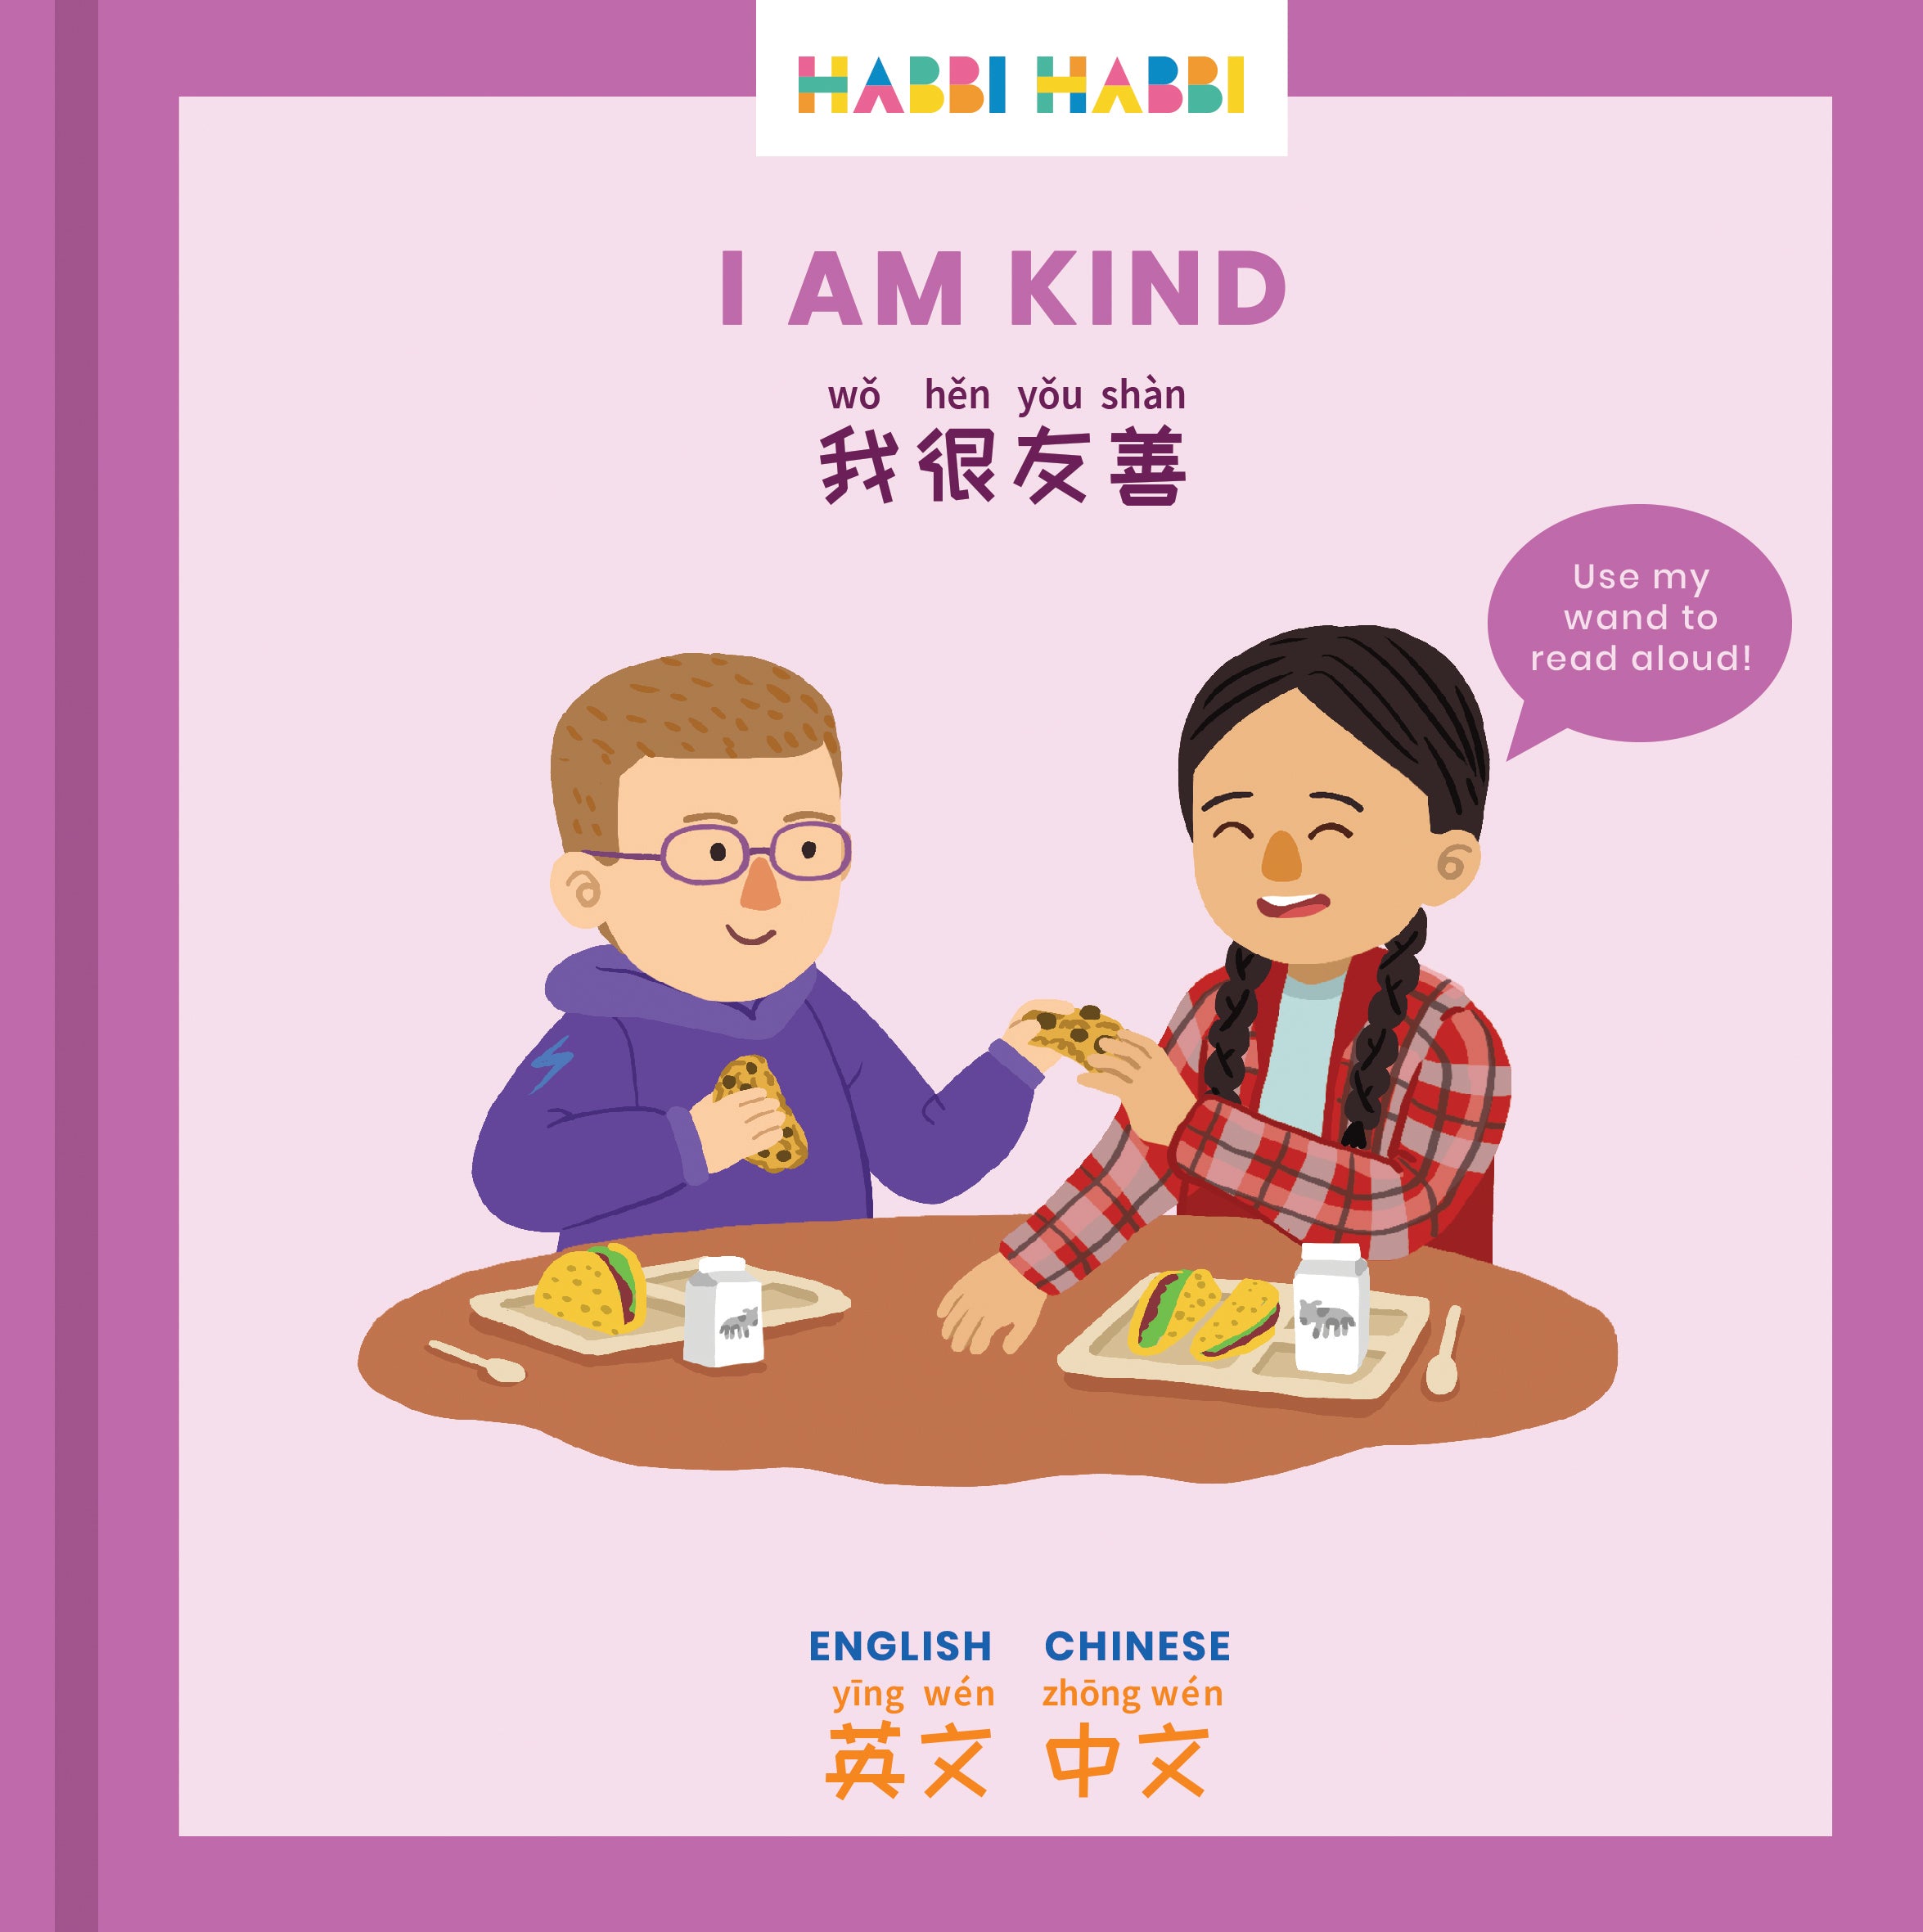 Bilingual Chinese Books that teach Kindness and Peace to Inspire Children -  Lah Lah Banana